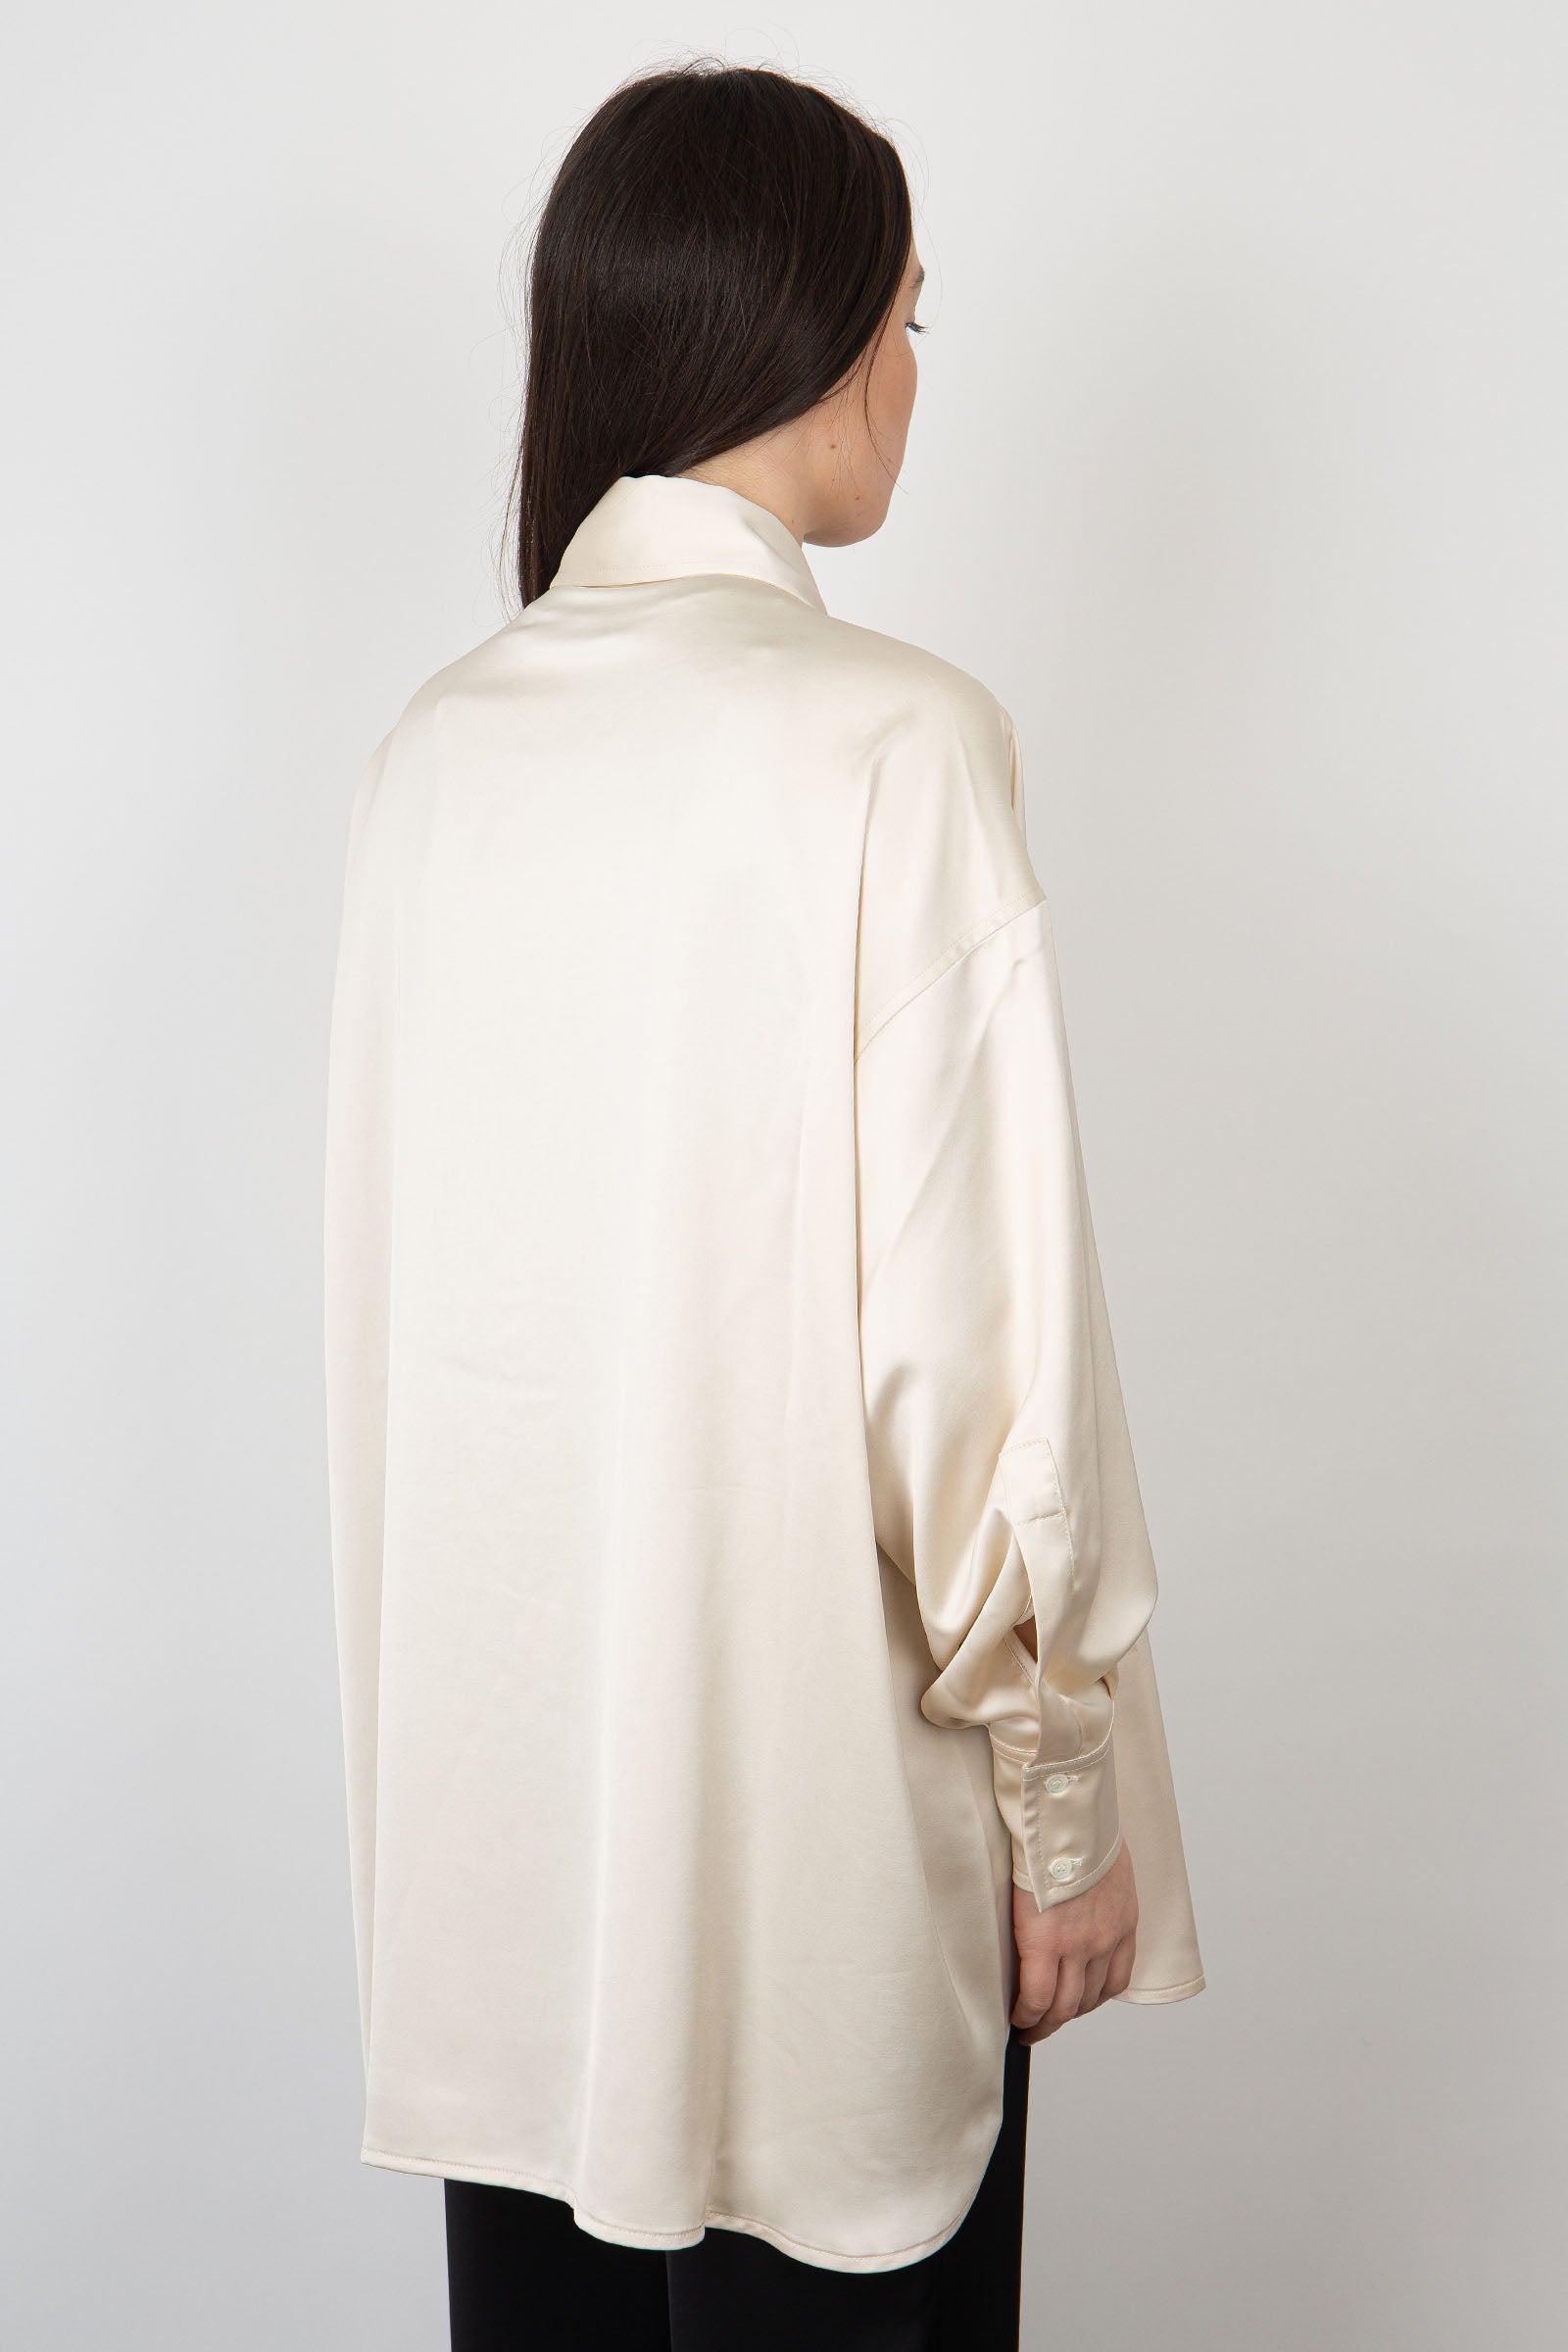 Roberto Collina Ivory Satin Oversize Shirt in Synthetic Fabric - 4